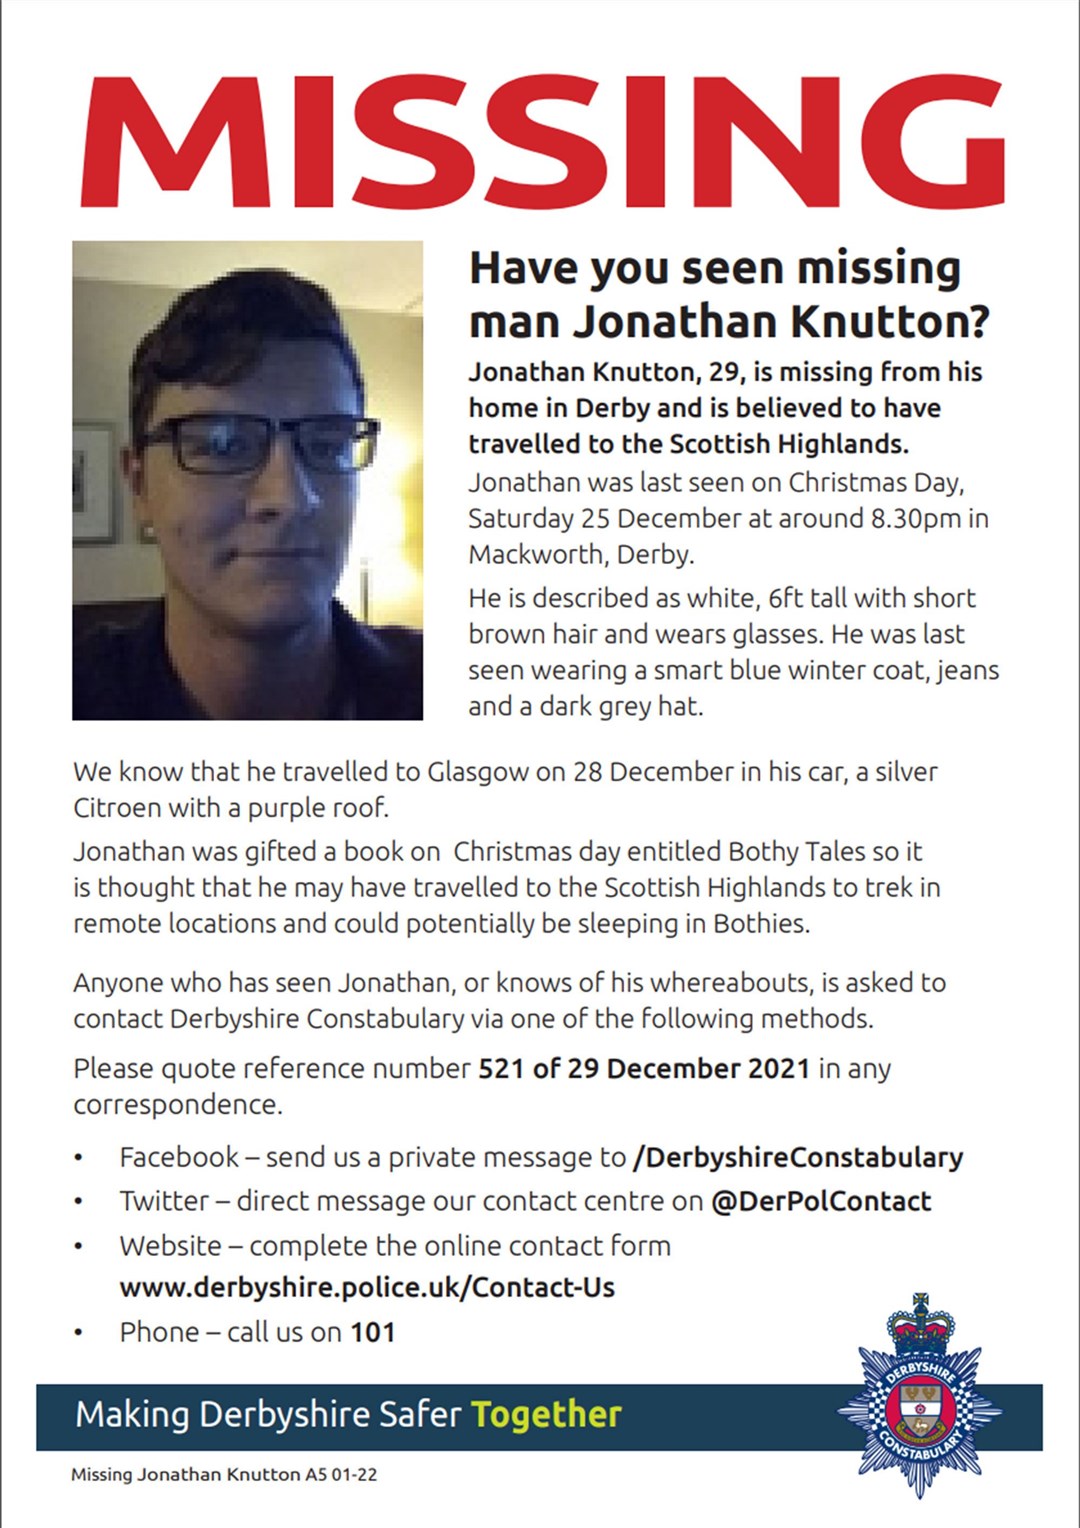 The latest missing poster appealing for information on Jonathan Knutton.